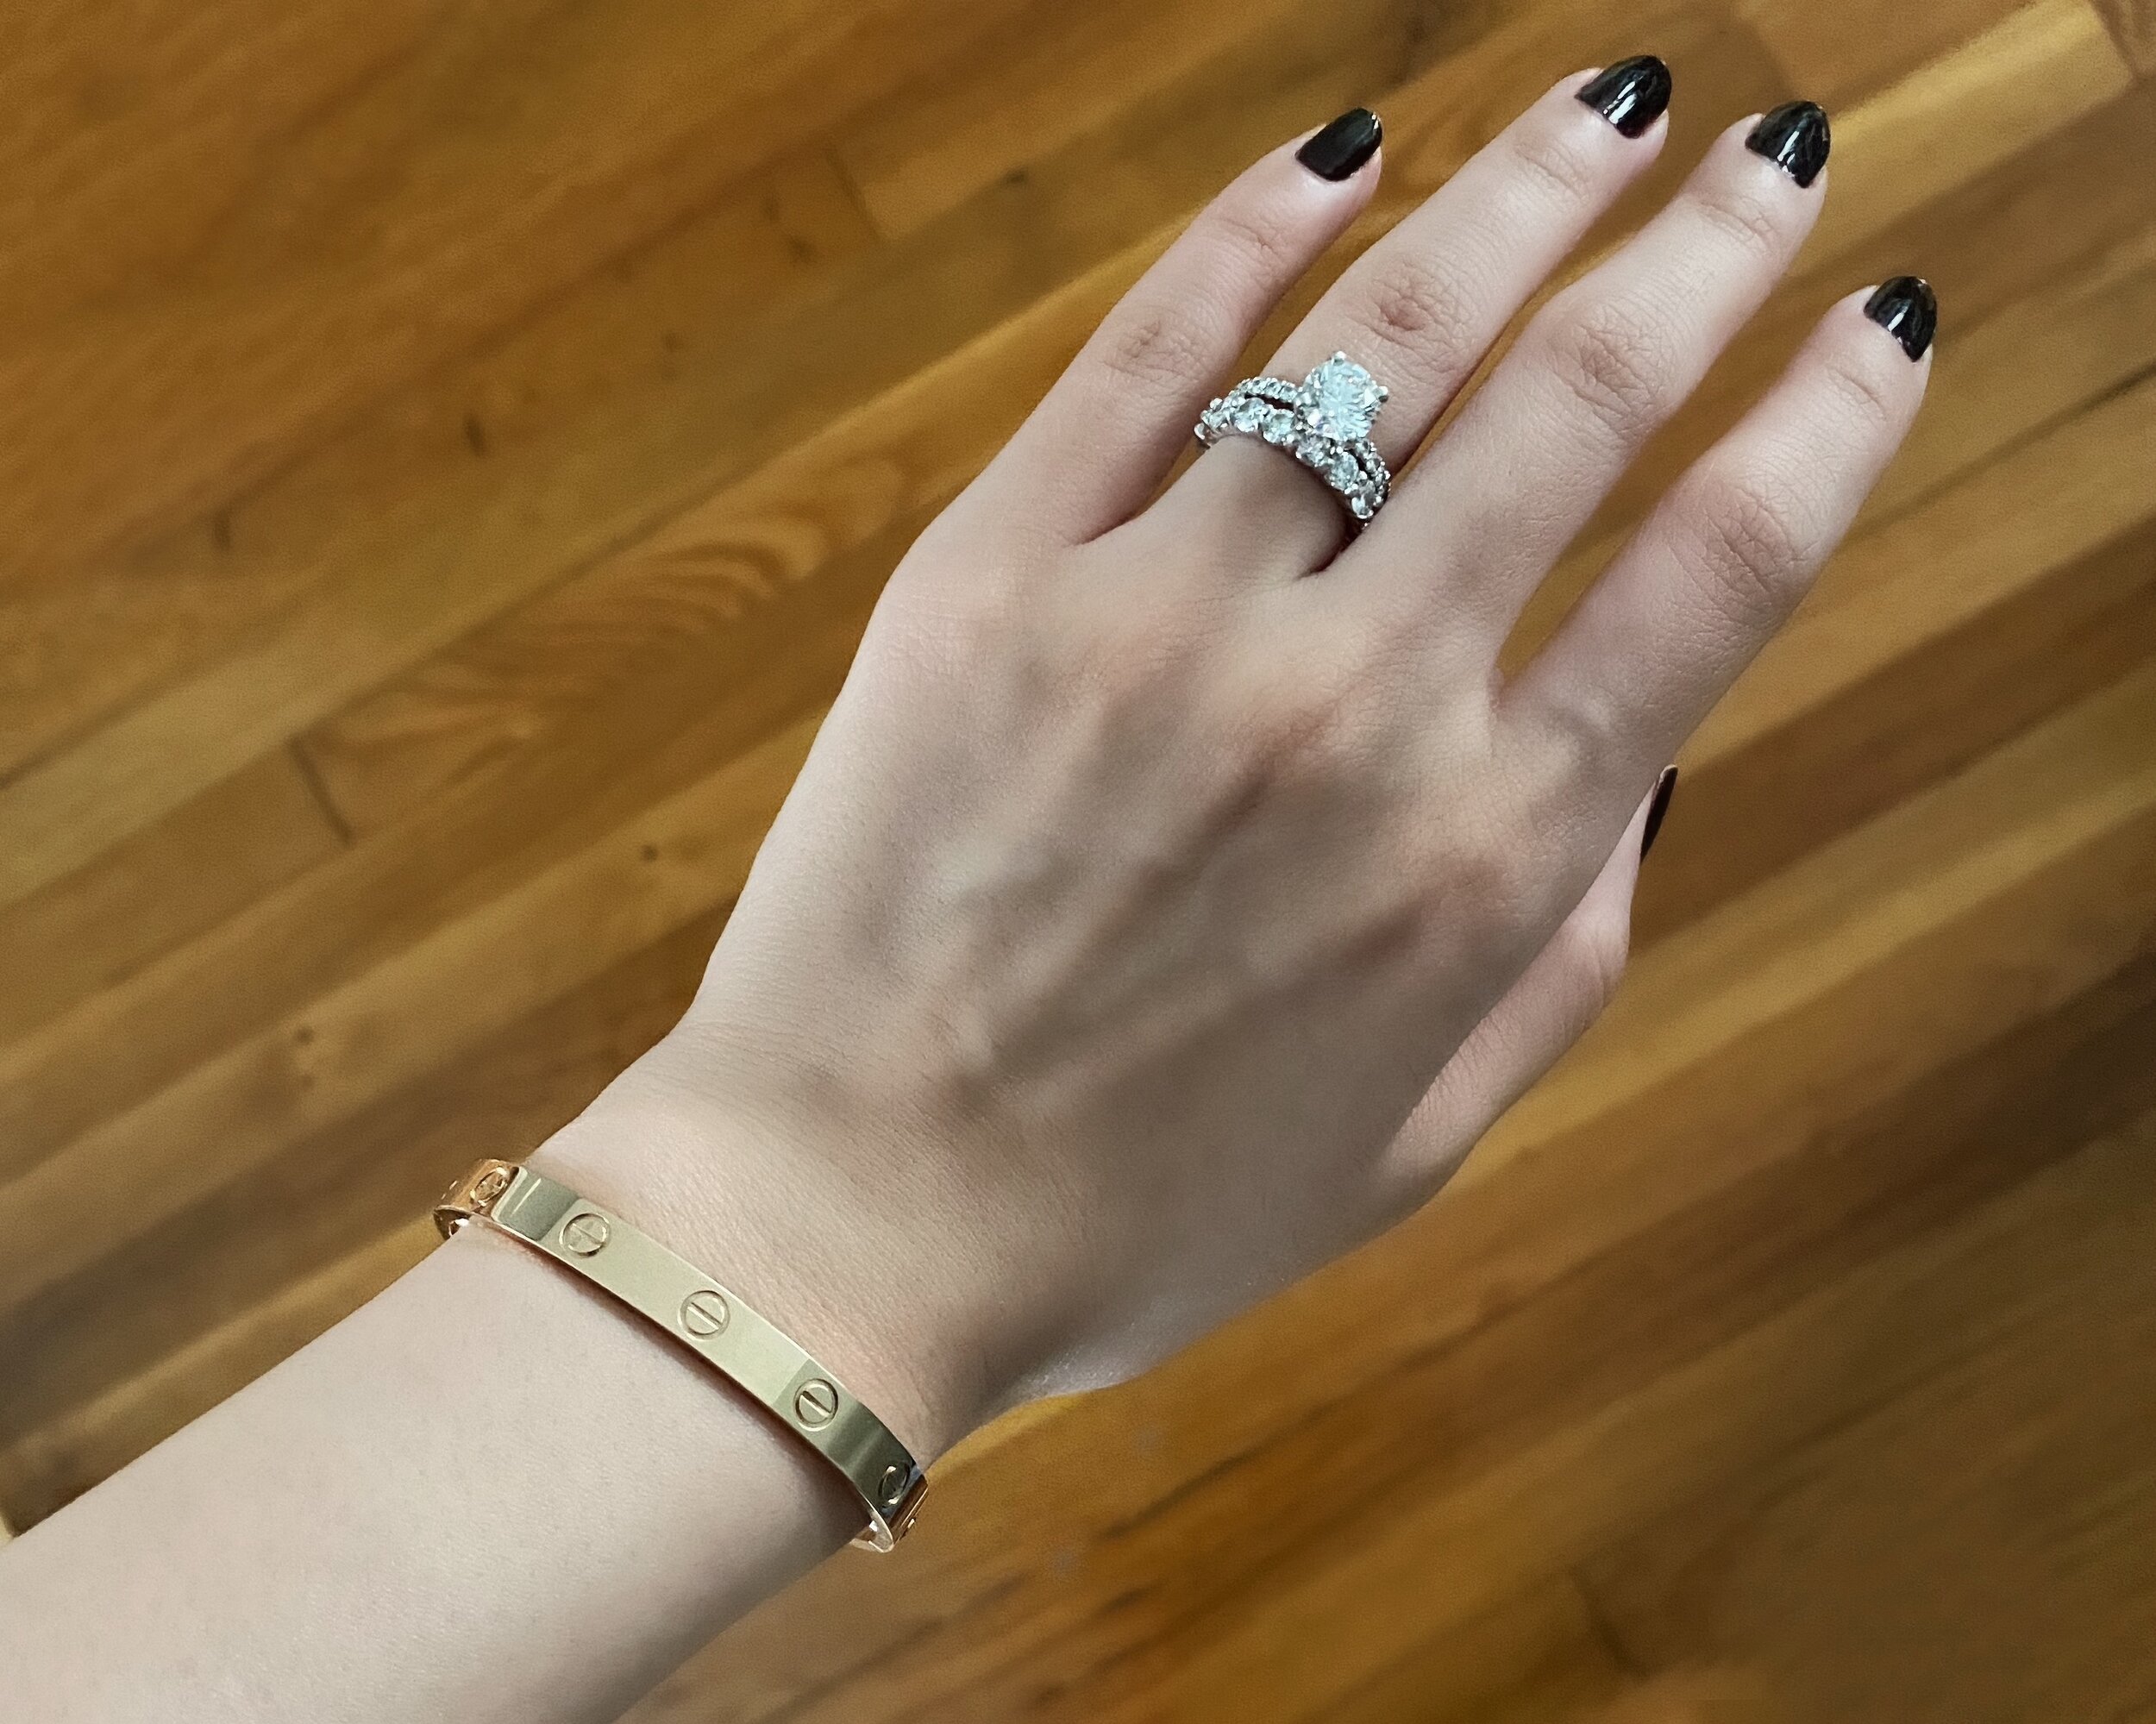 My 10 Year Anniversary Cartier Gifts — Stacey with an E